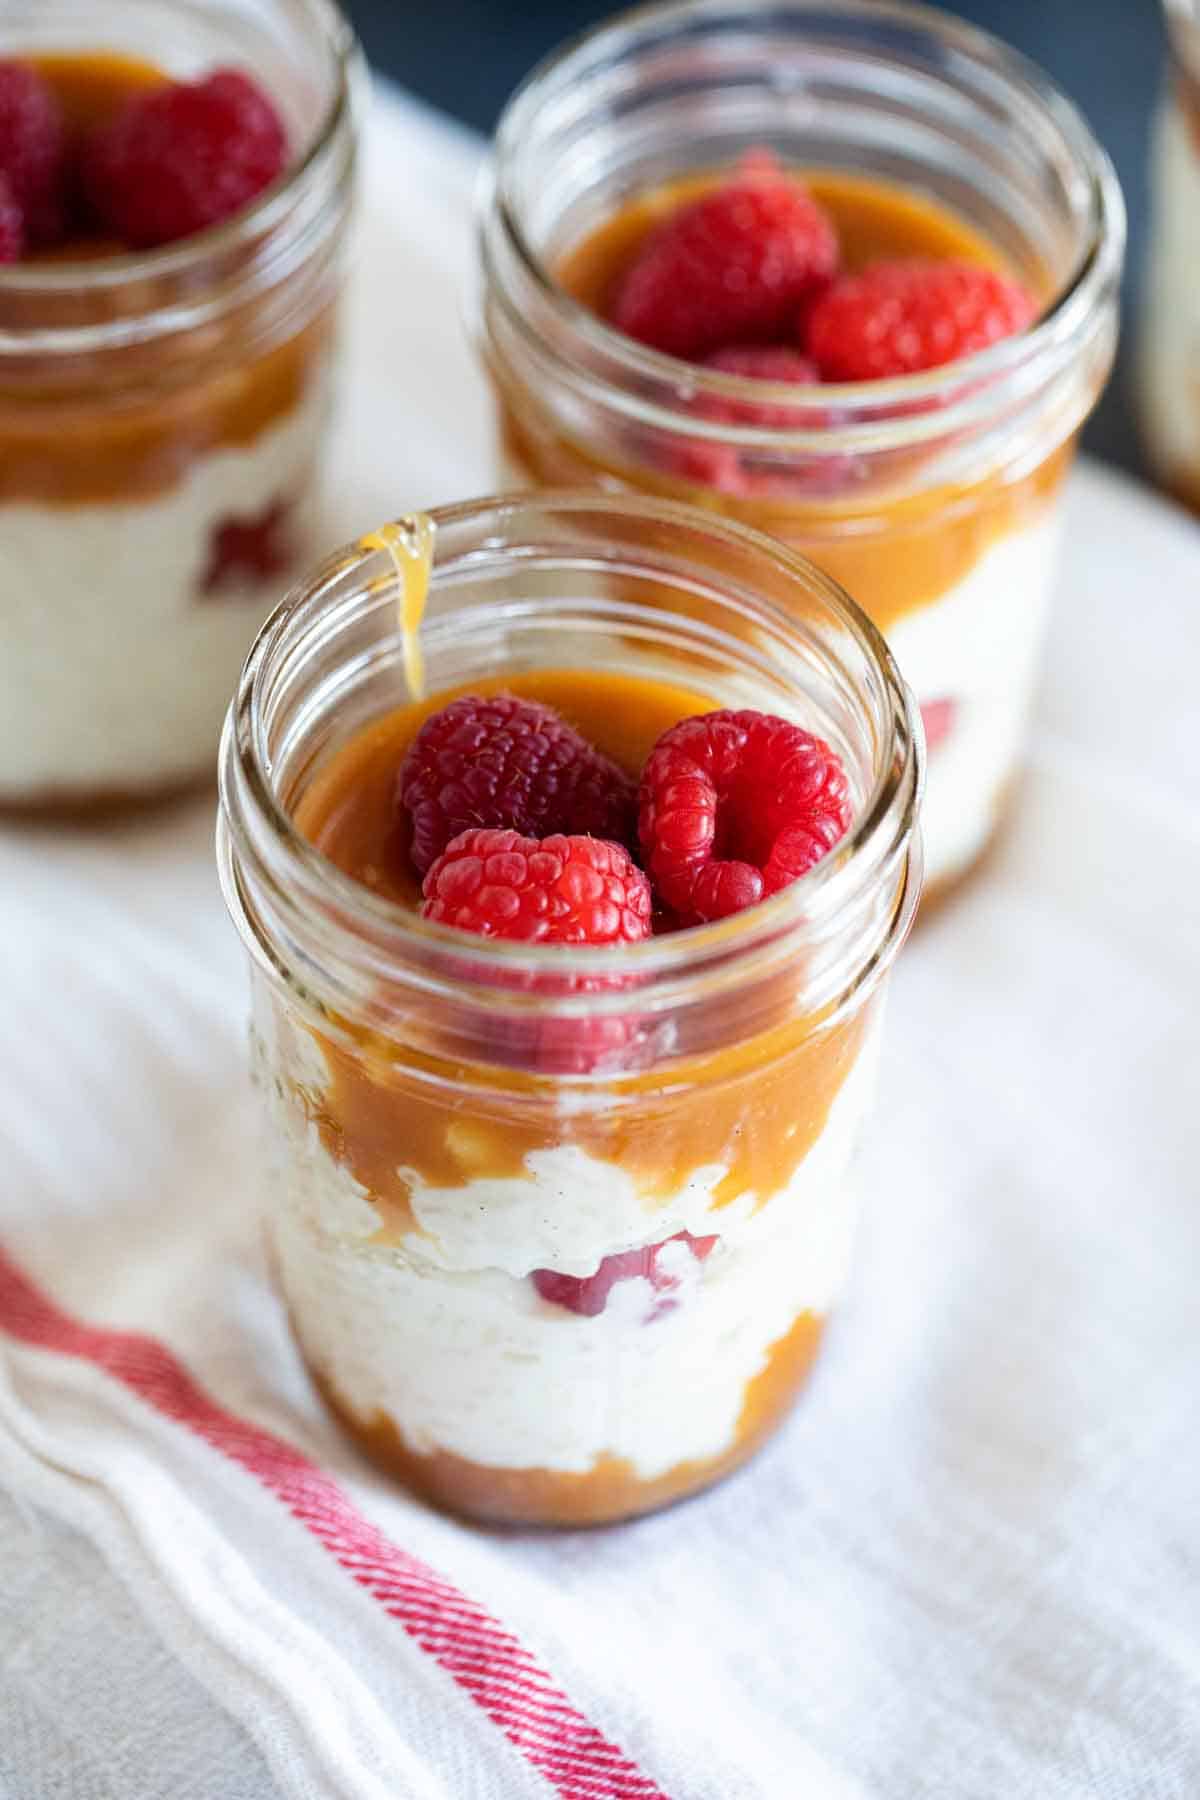 jars filled with rice pudding with caramel and fresh raspberries.